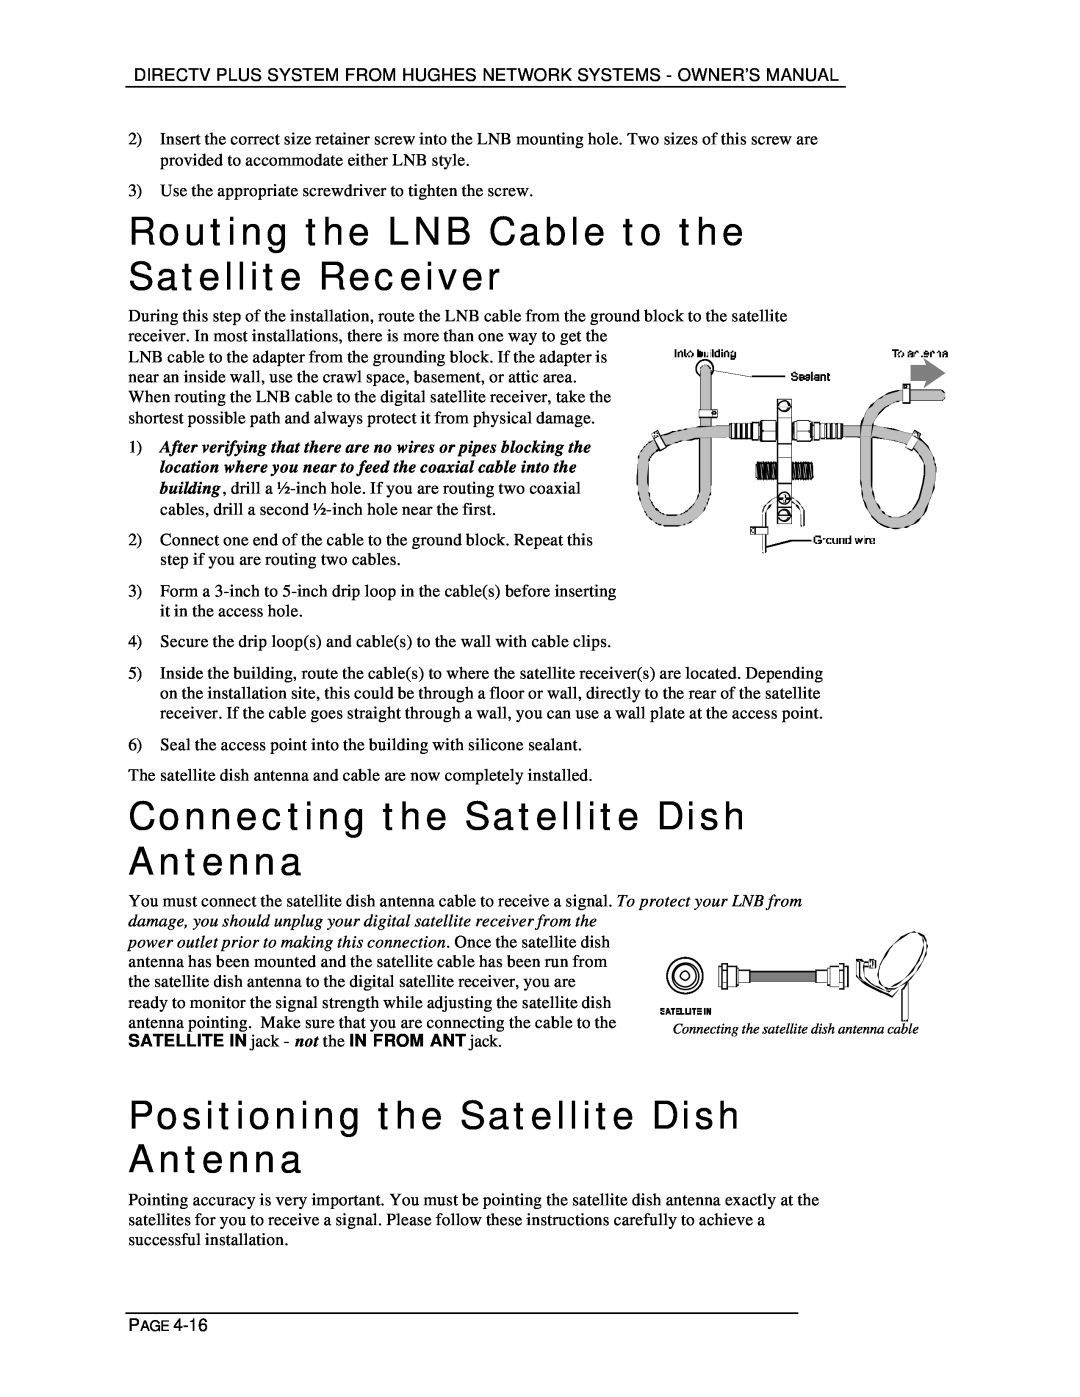 DirecTV HIRD-E25, HIRD-E11 Routing the LNB Cable to the Satellite Receiver, Connecting the Satellite Dish Antenna 